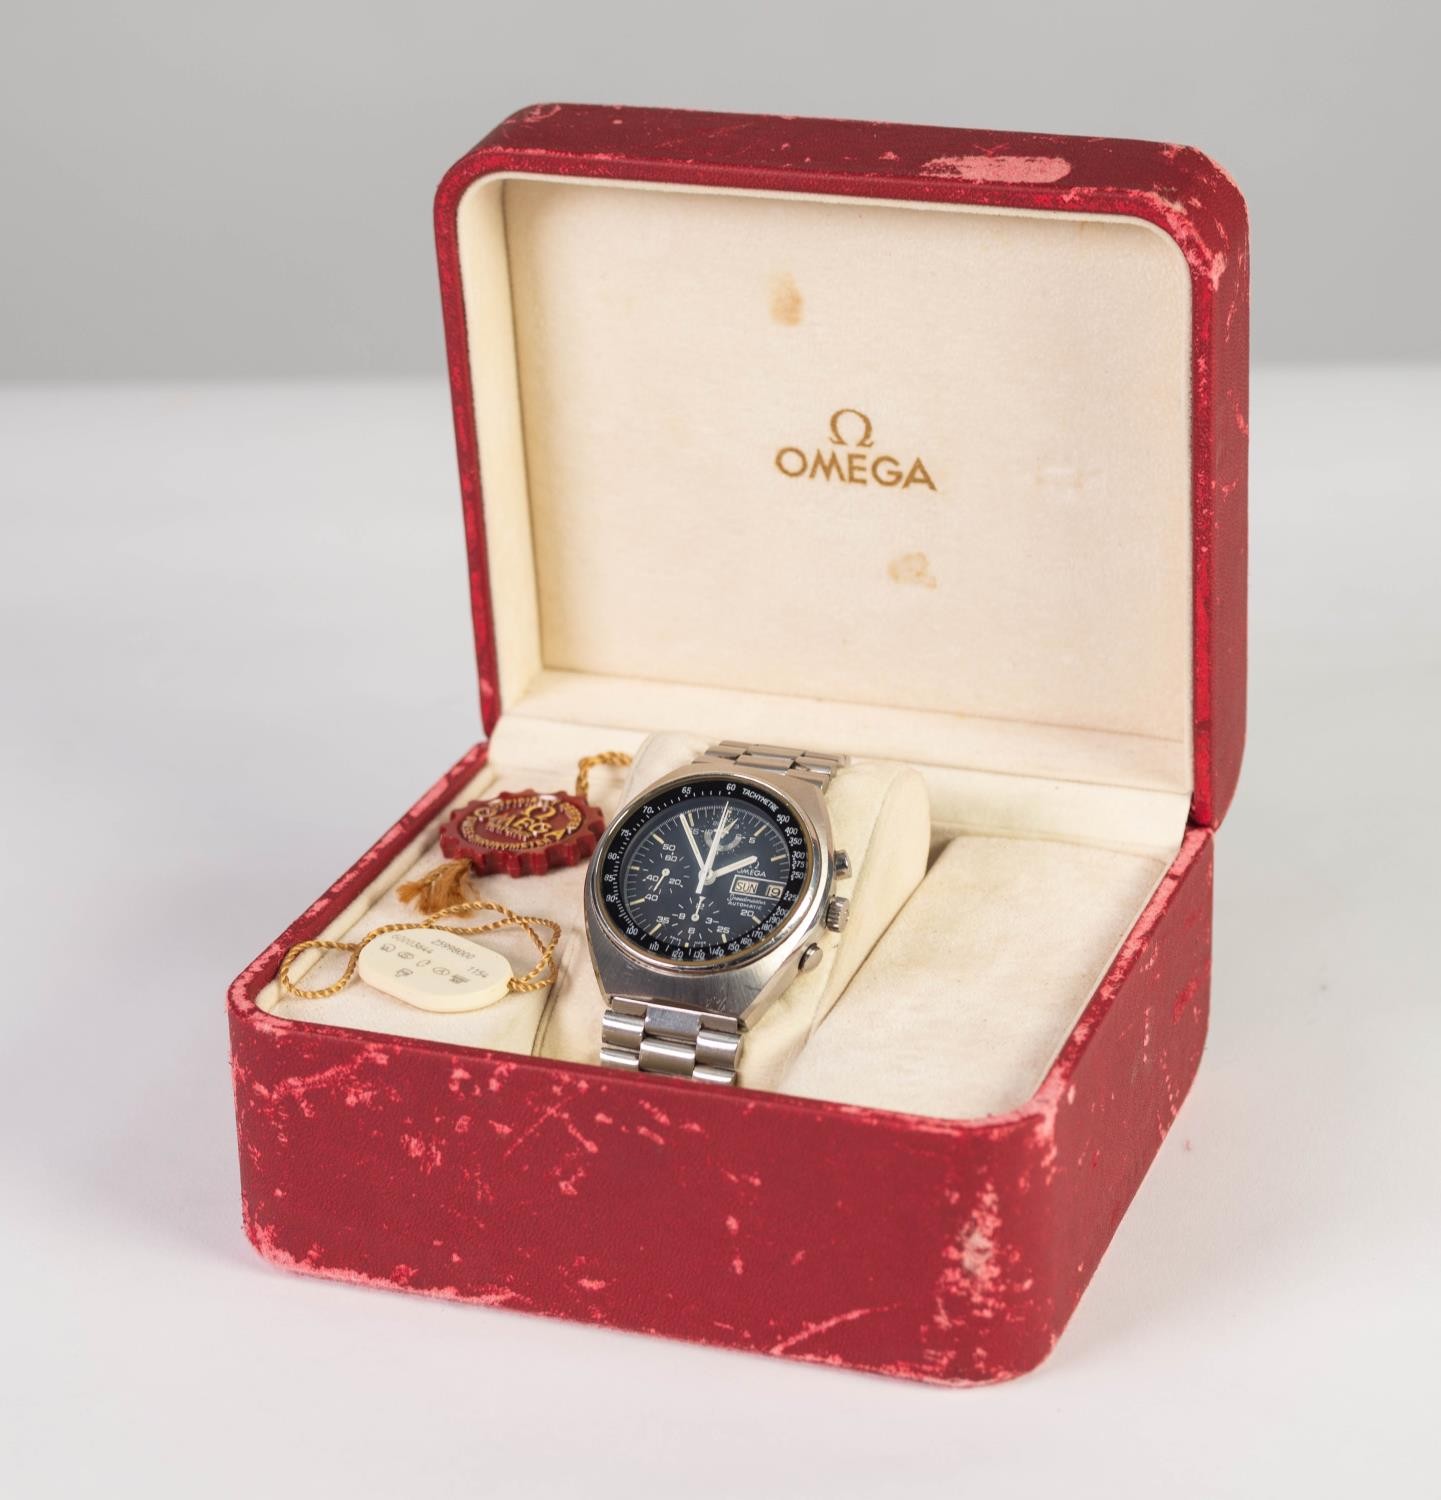 GENT'S OMEGA SPEEDMASTER AUTOMATIC DAY DATE OFFICIALLY CERTIFIED CHRONOMETER WRISTWATCH, the - Image 5 of 7